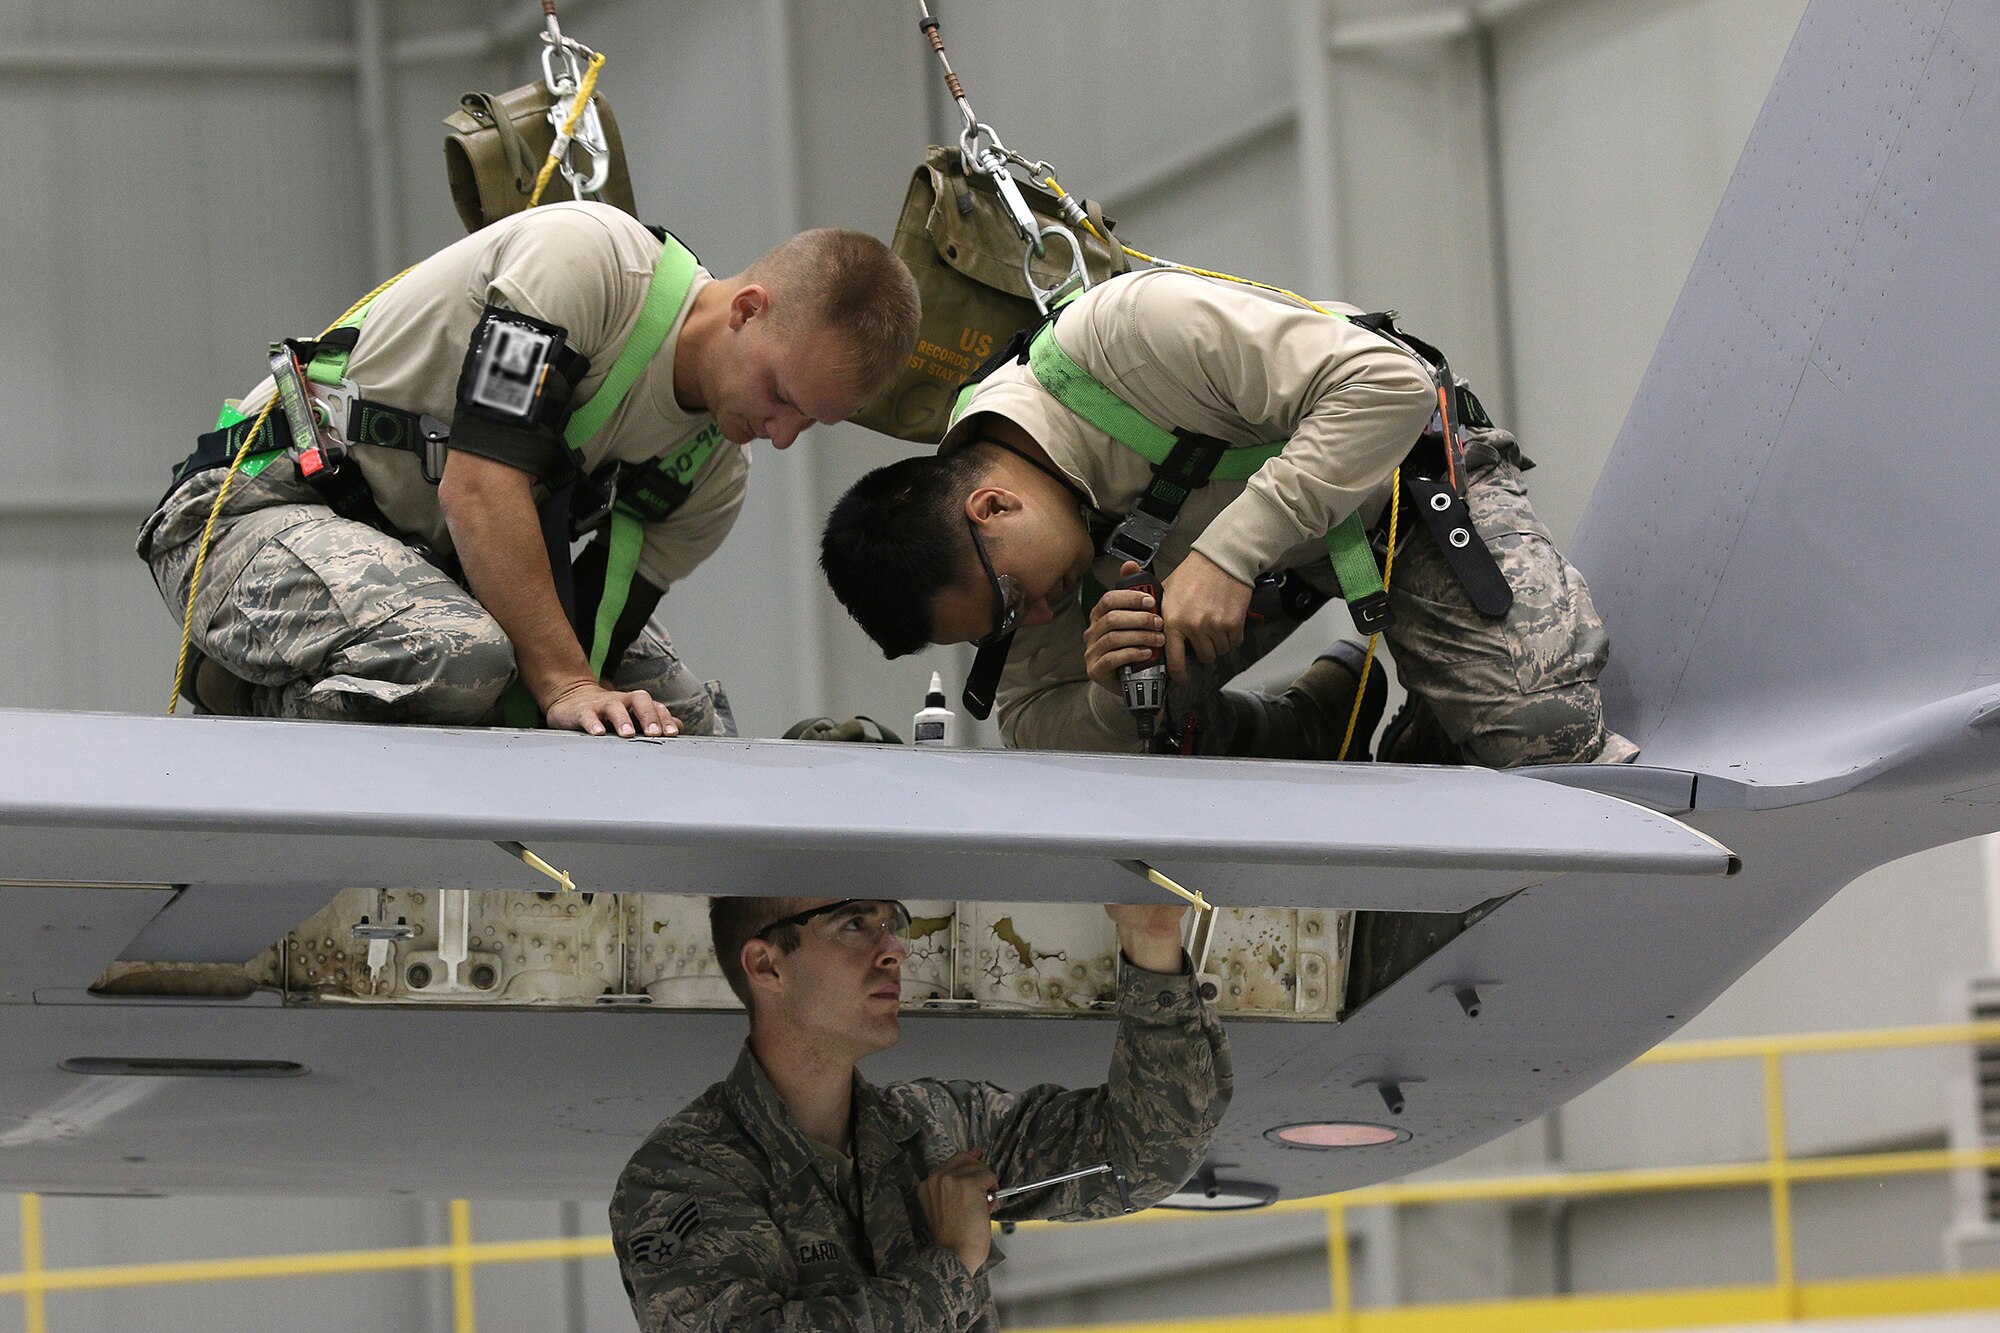 WRIGHT-PATTERSON AIR FORCE BASE, Ohio – Senior Airmen Matthew Card (bottom), Michael Kessinger (top left) and  John Tapia (top right),  all 445th Aircraft Maintenance Squadron crew chiefs, complete structural repairs on a flight control panel of a C-17 Globemaster III. (U.S. Air Force photo/Tech. Sgt. Patrick O’Reilly)